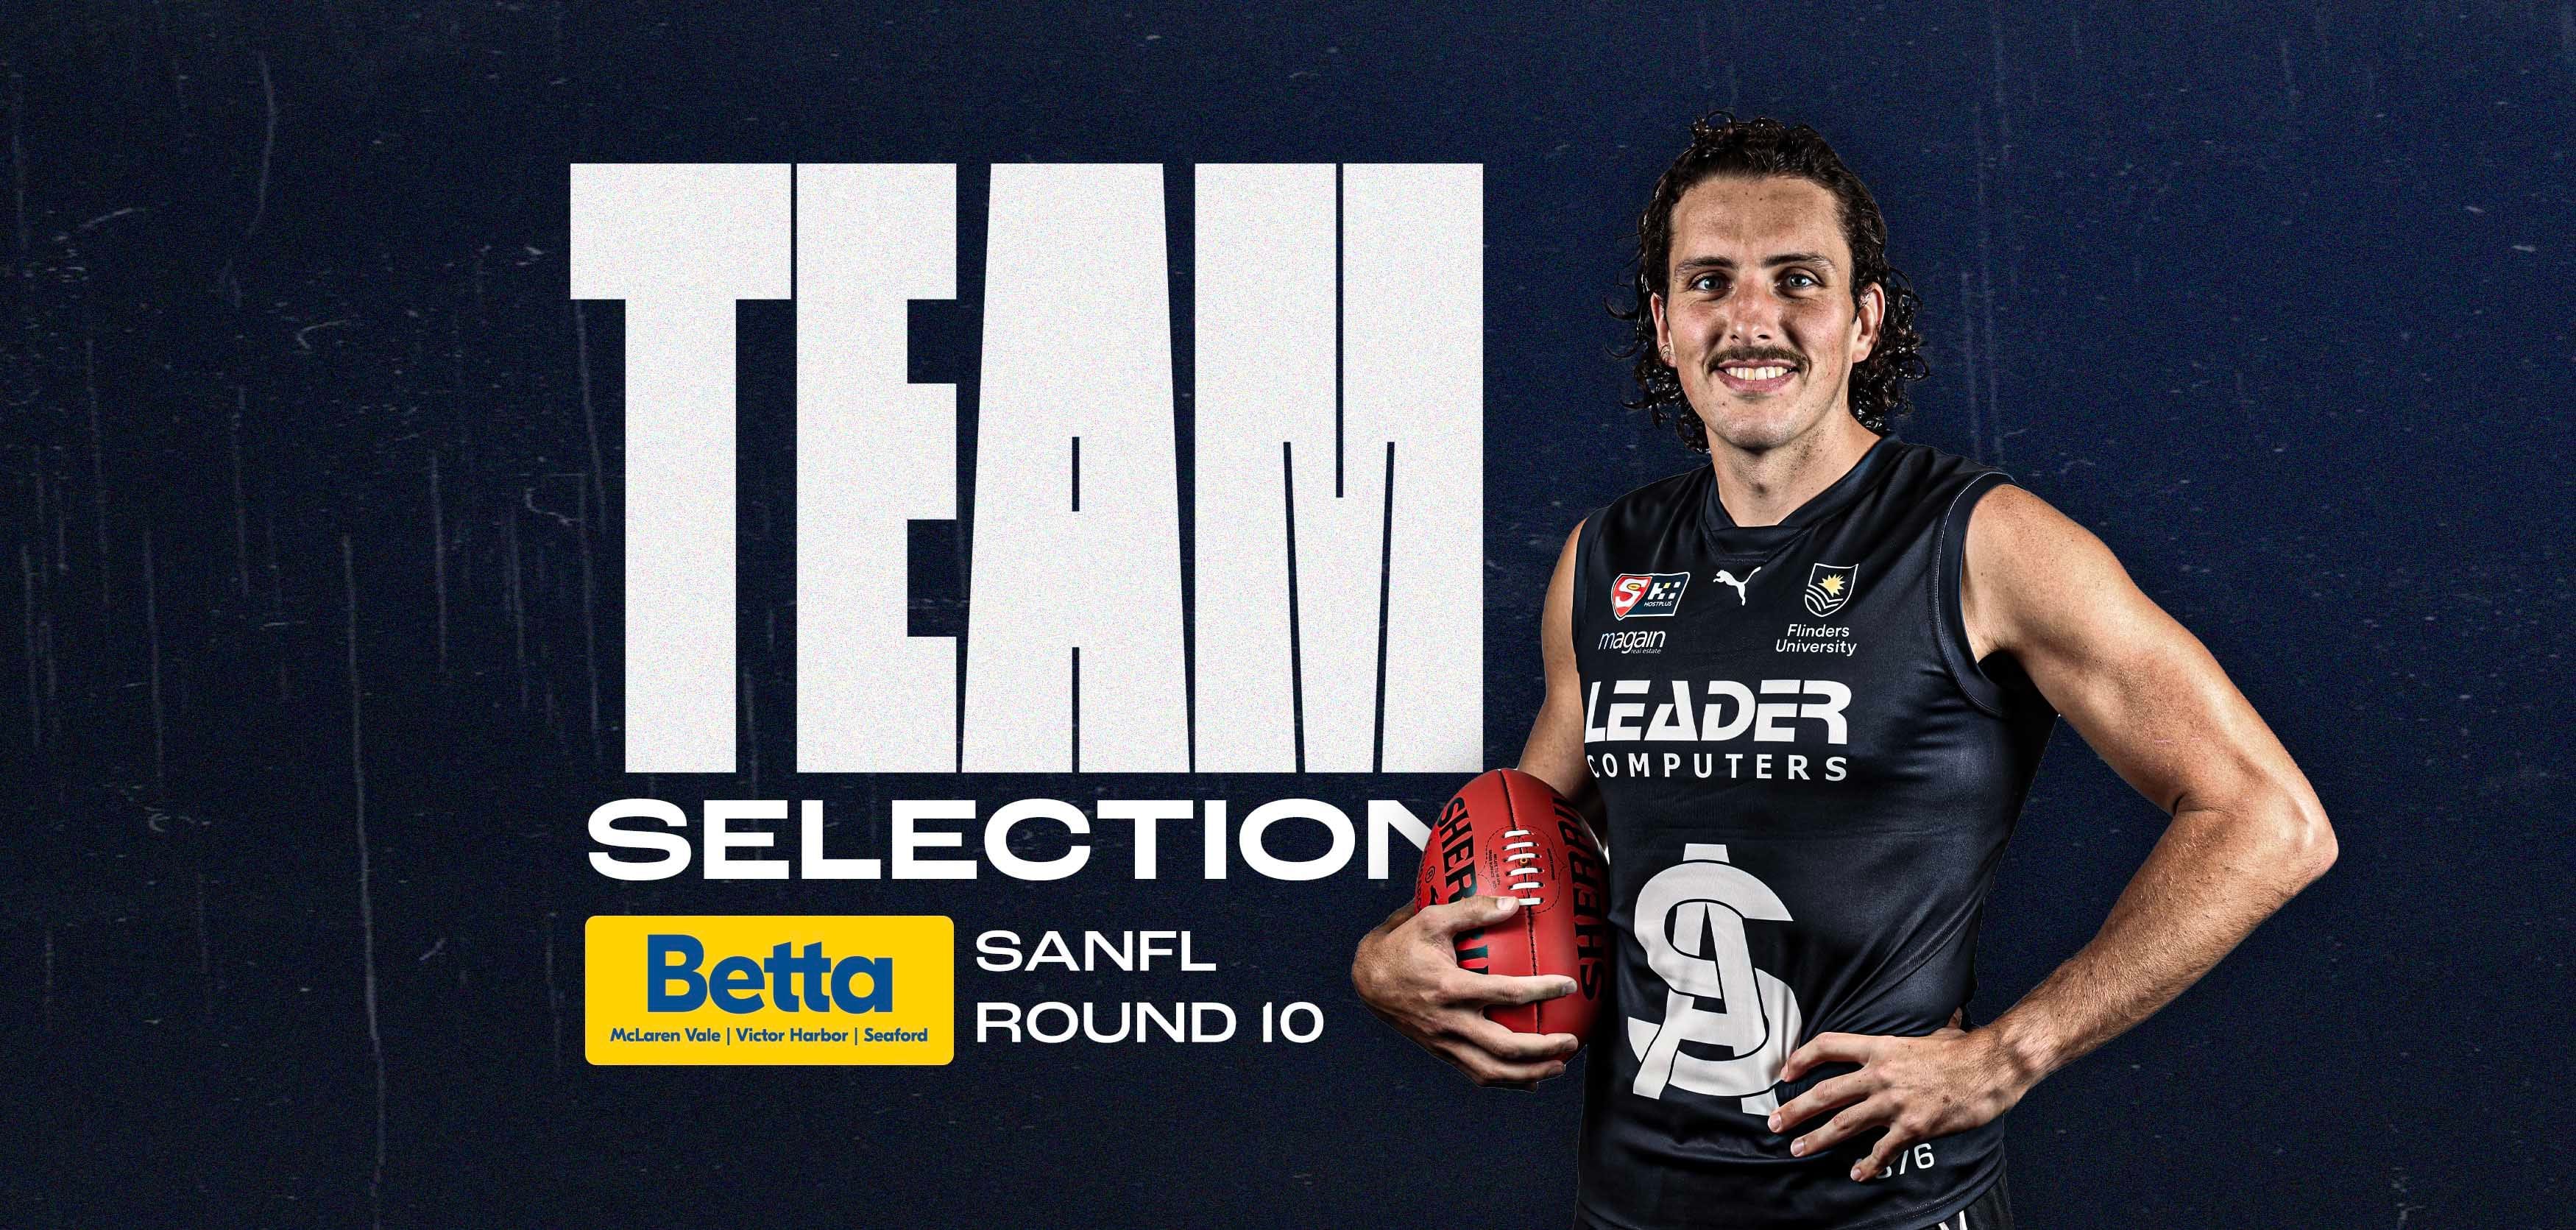 BETTA Team Selection: SANFL Round 10 v Central Districts